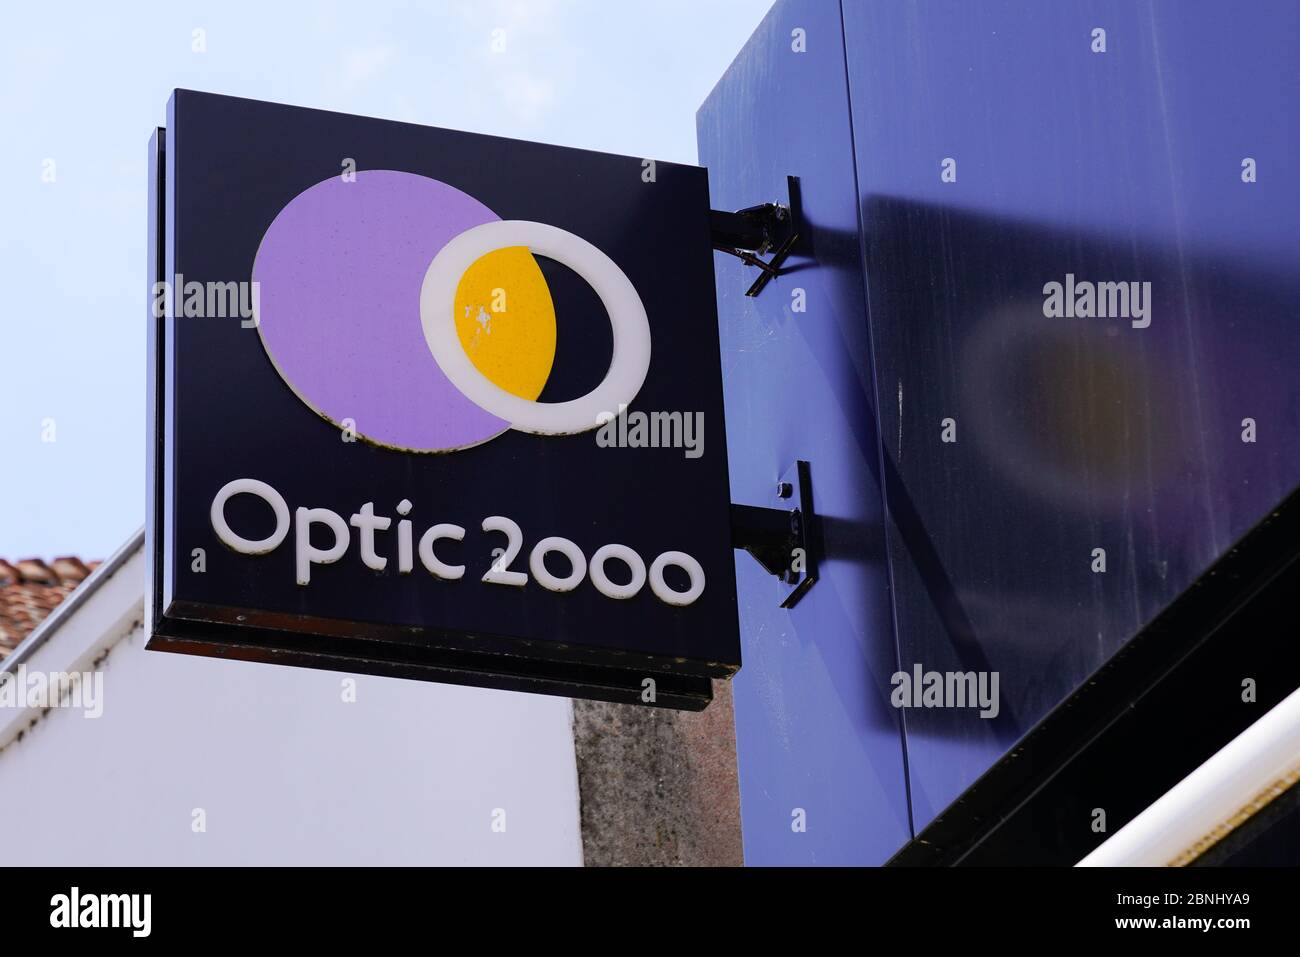 Bordeaux , Aquitaine / France - 05 12 2020 : Optic 2000 logo shop sign  french store street brand Optician glasses business Stock Photo - Alamy